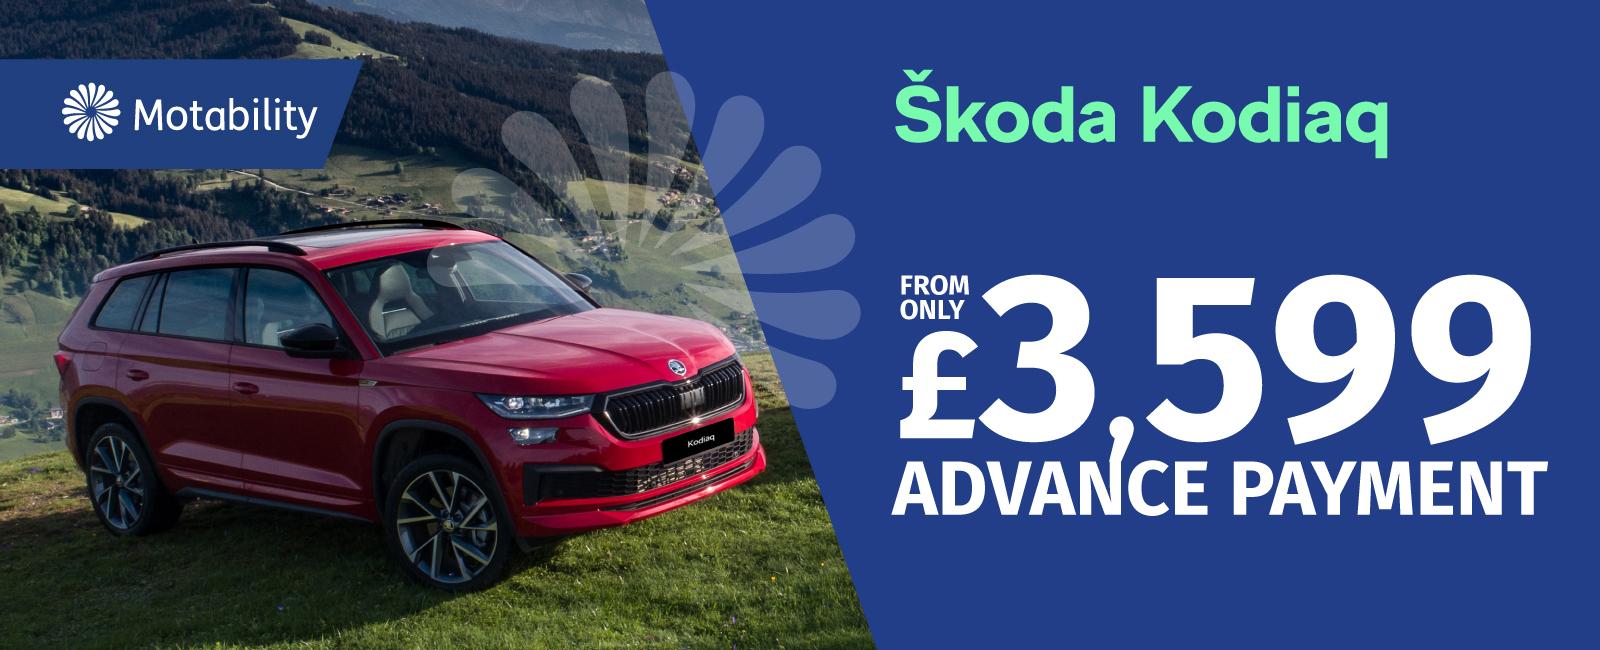 The Skoda Kodiaq from £3,599 advance payment on the Motability Scheme